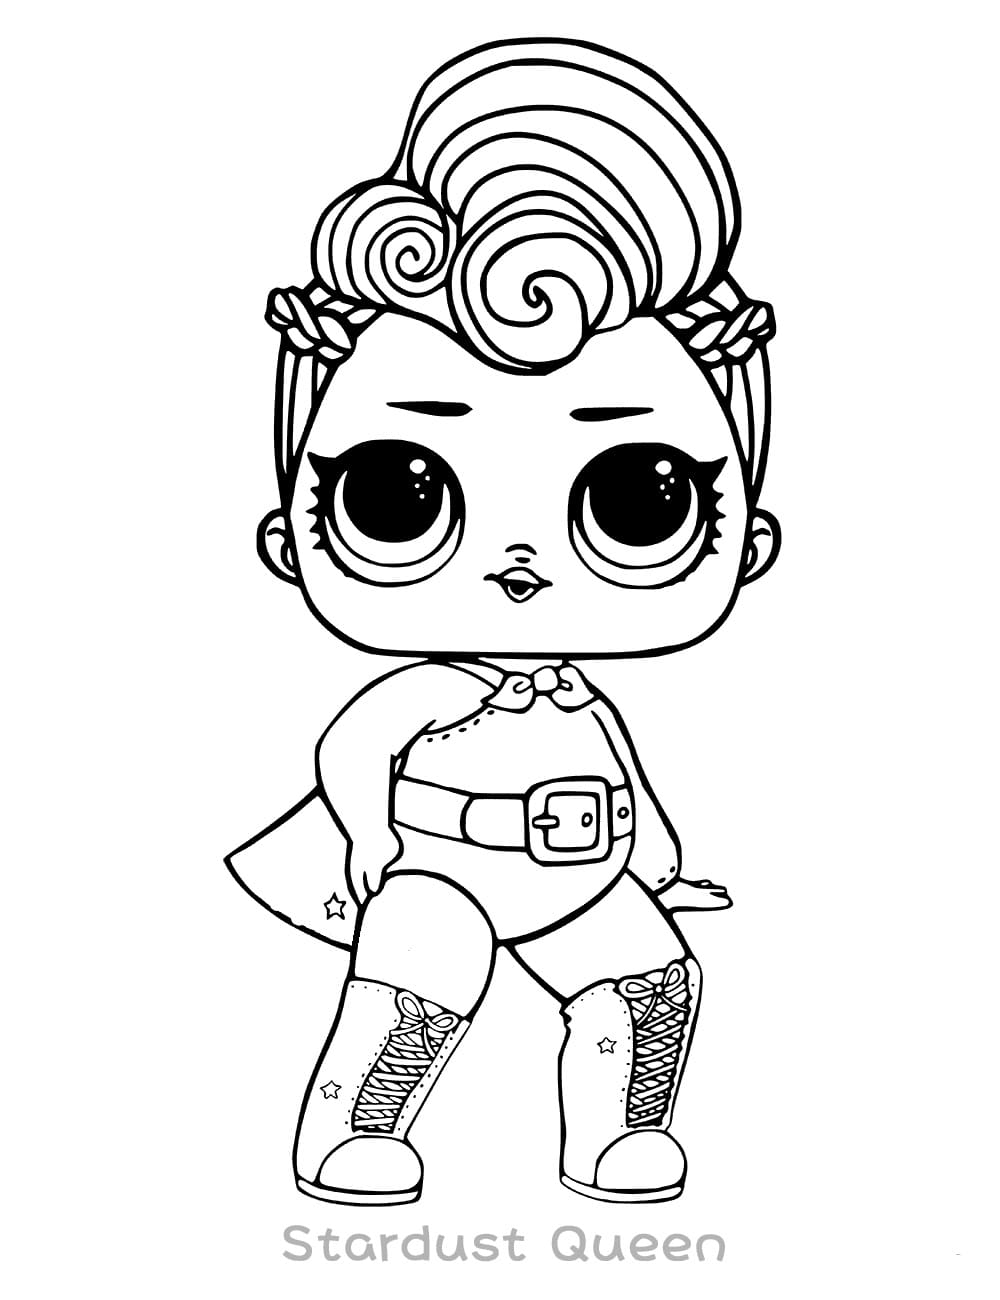 Stardust Queen Lol coloring page